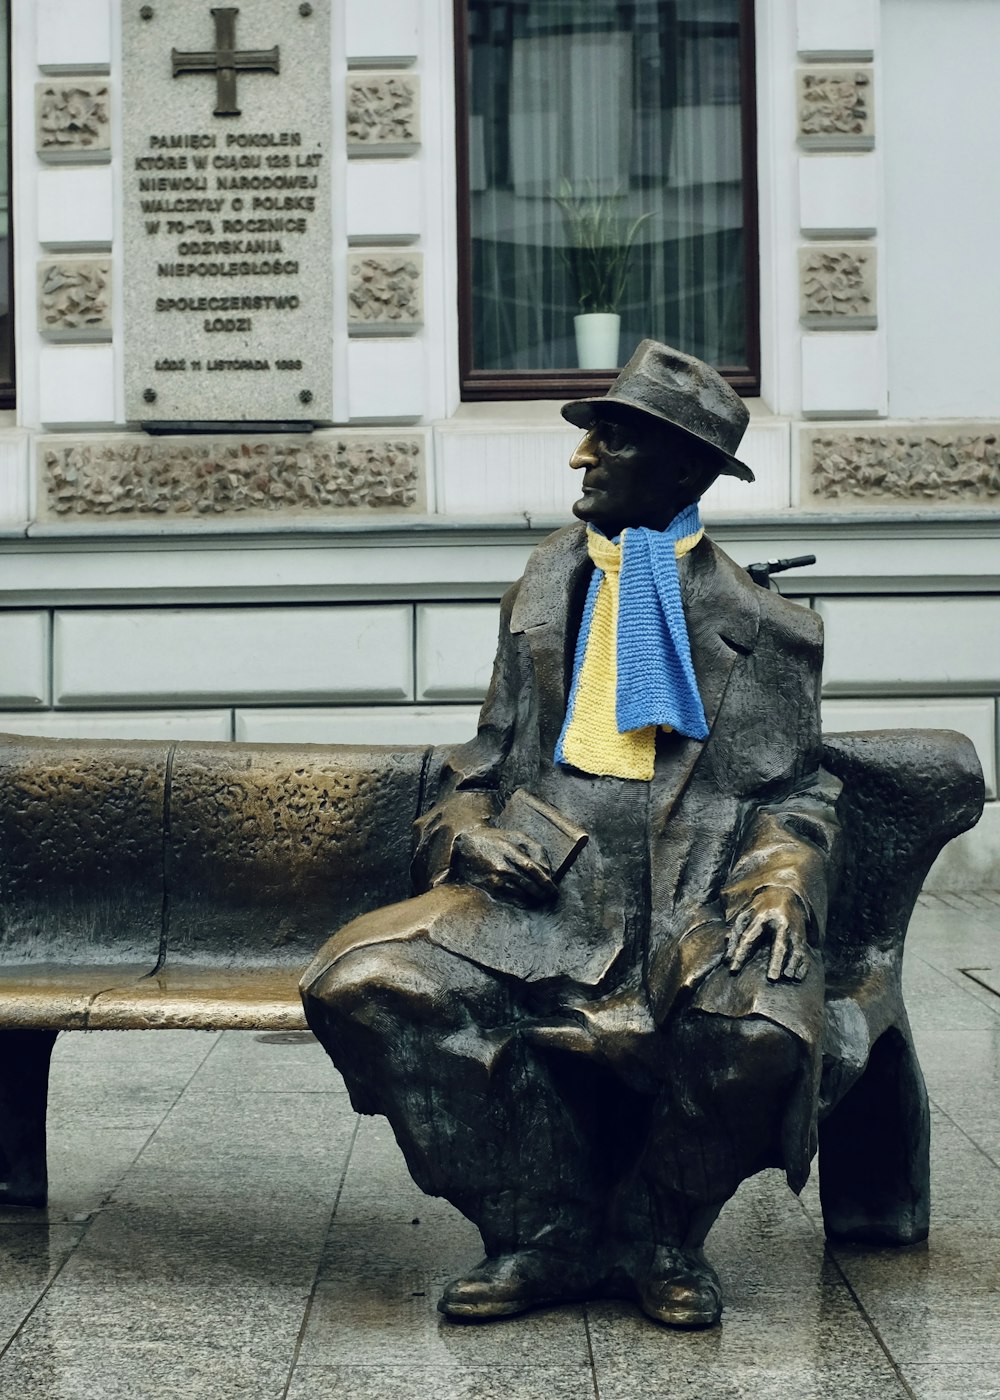 a statue of a person sitting on a bench